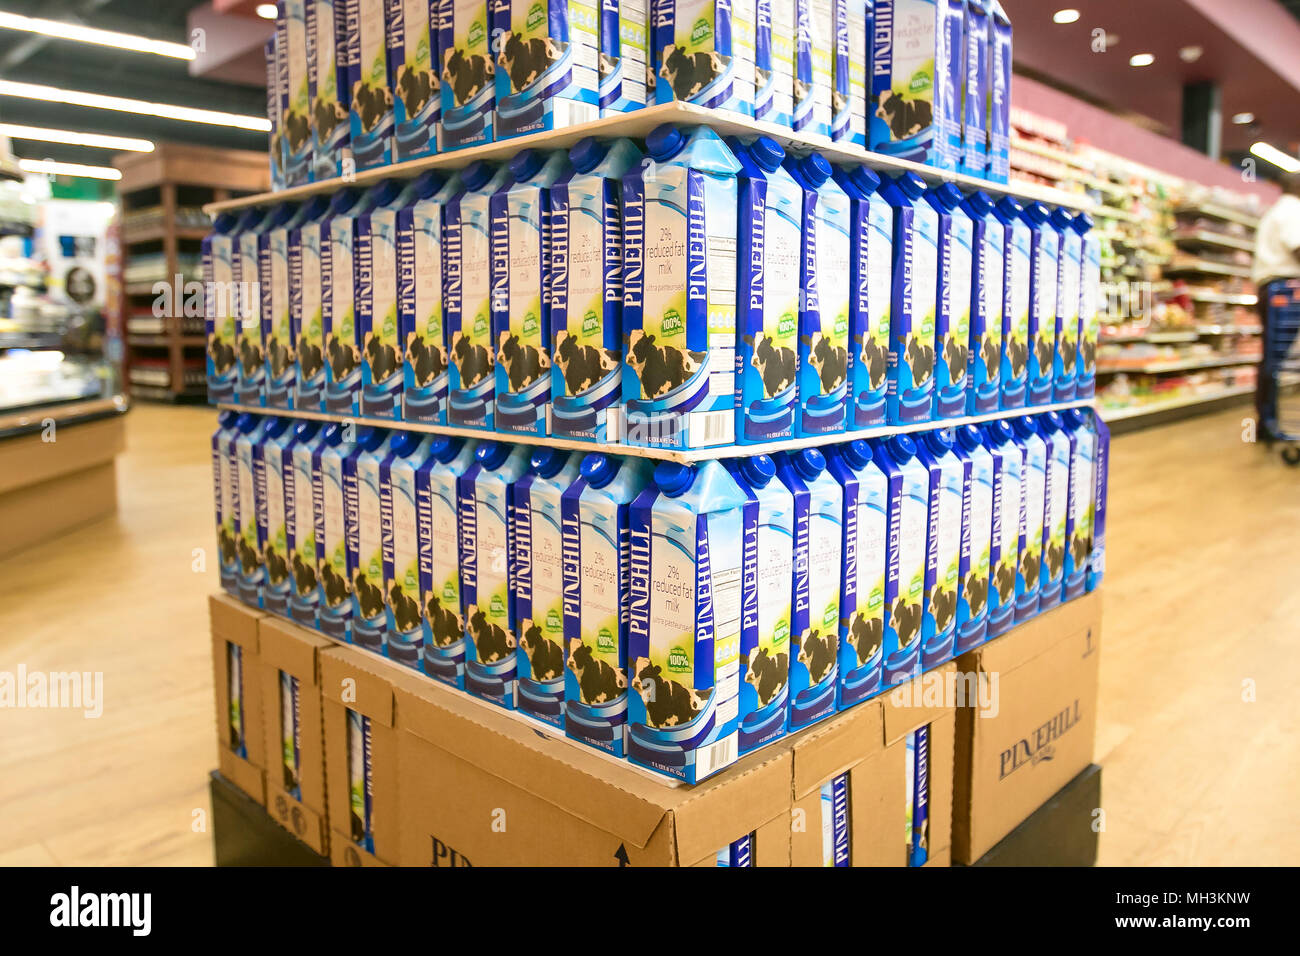 Holetown, Barbados, 03-19-2018: Milk cartons are stacked on the floor of a supermarket. Stock Photo